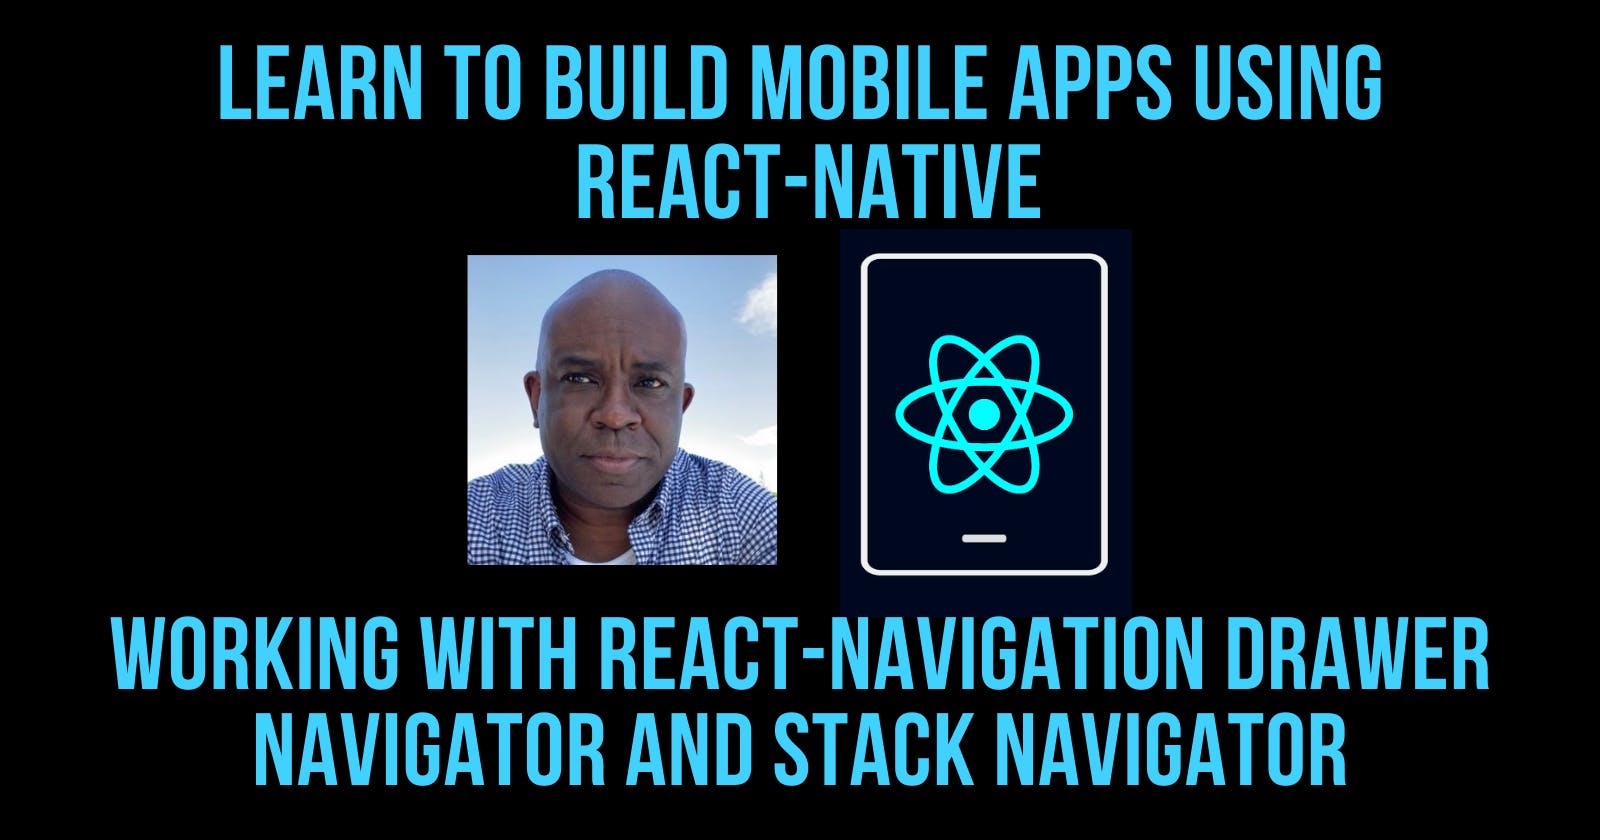 Learn to Build React Native Mobile Apps, Intro to Working with React-Navigation DrawerNavigator and StackNavigator